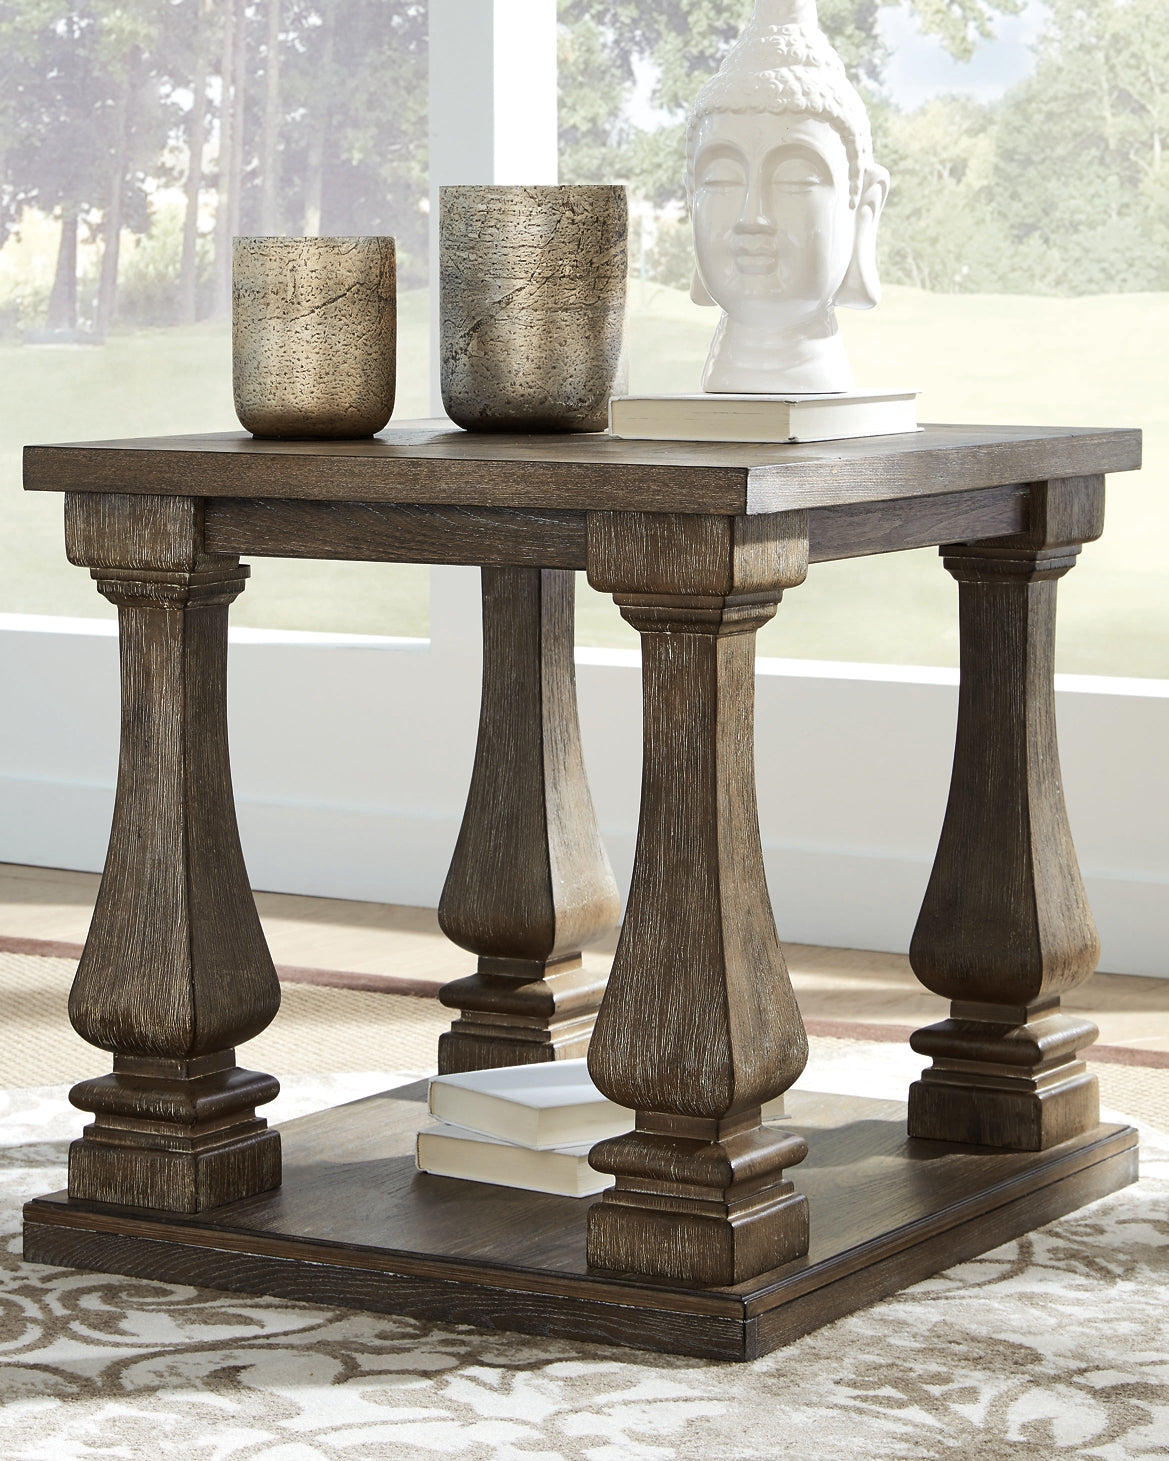 Johnelle 2 End Tables at Cloud 9 Mattress & Furniture furniture, home furnishing, home decor